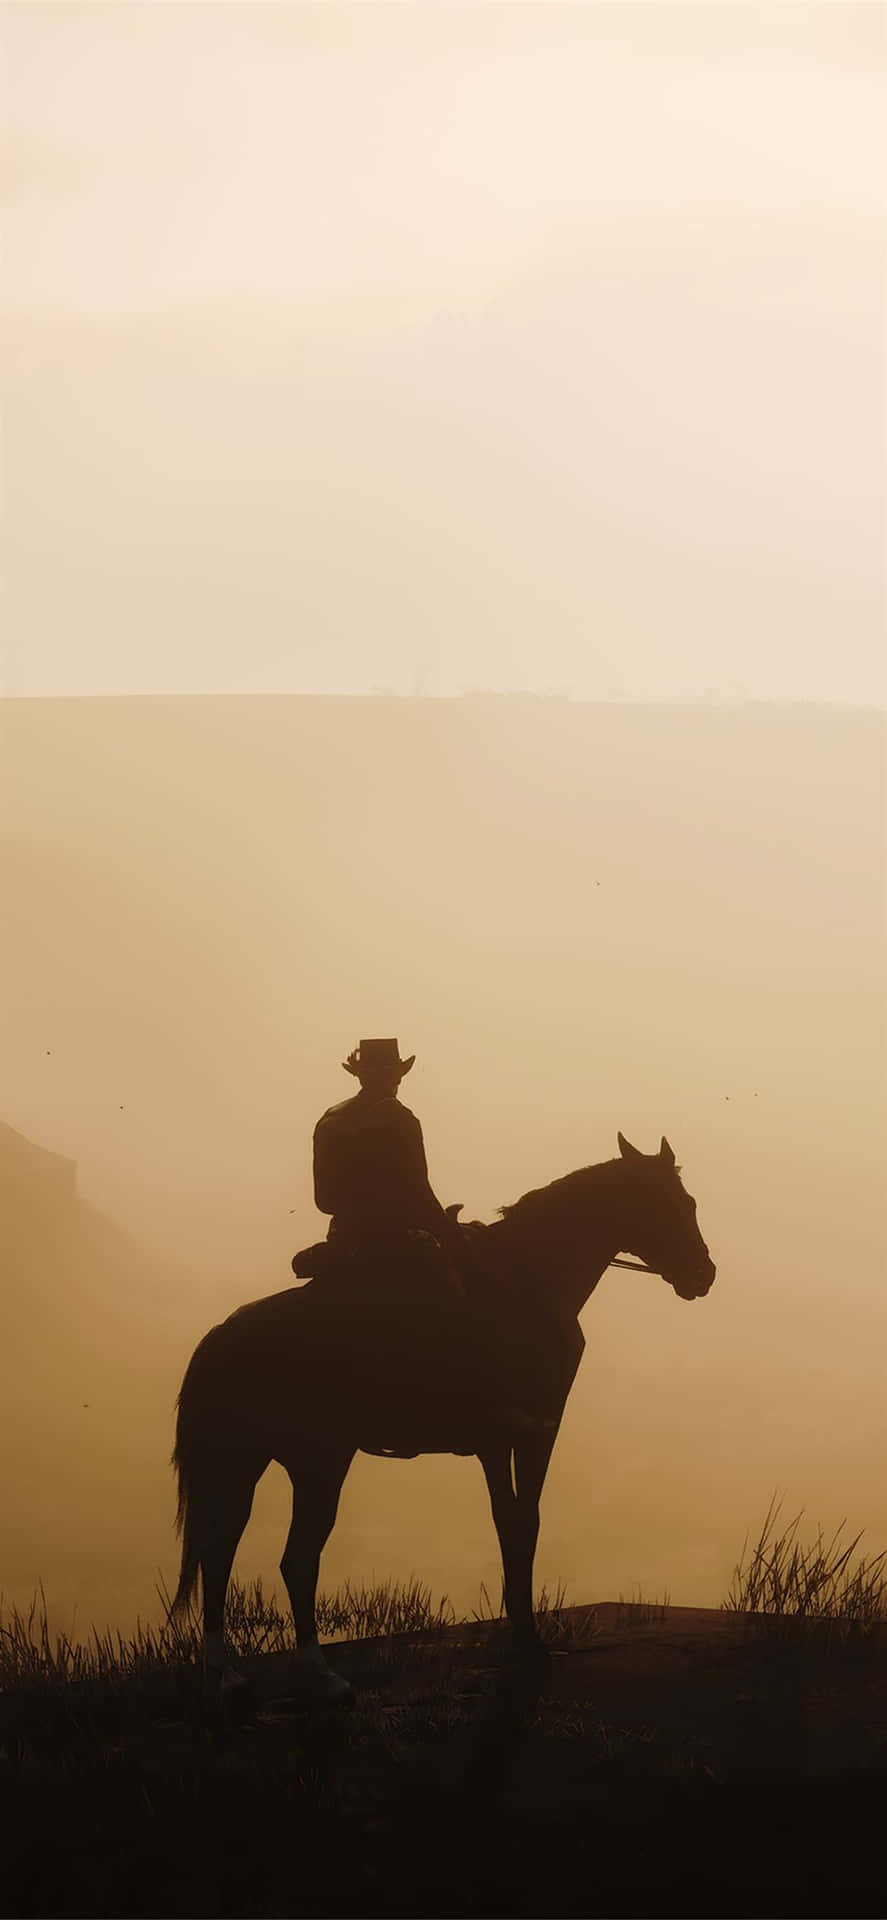 Best Red Dead Redemption 2 Silhouette Of A Man On A Horse Background